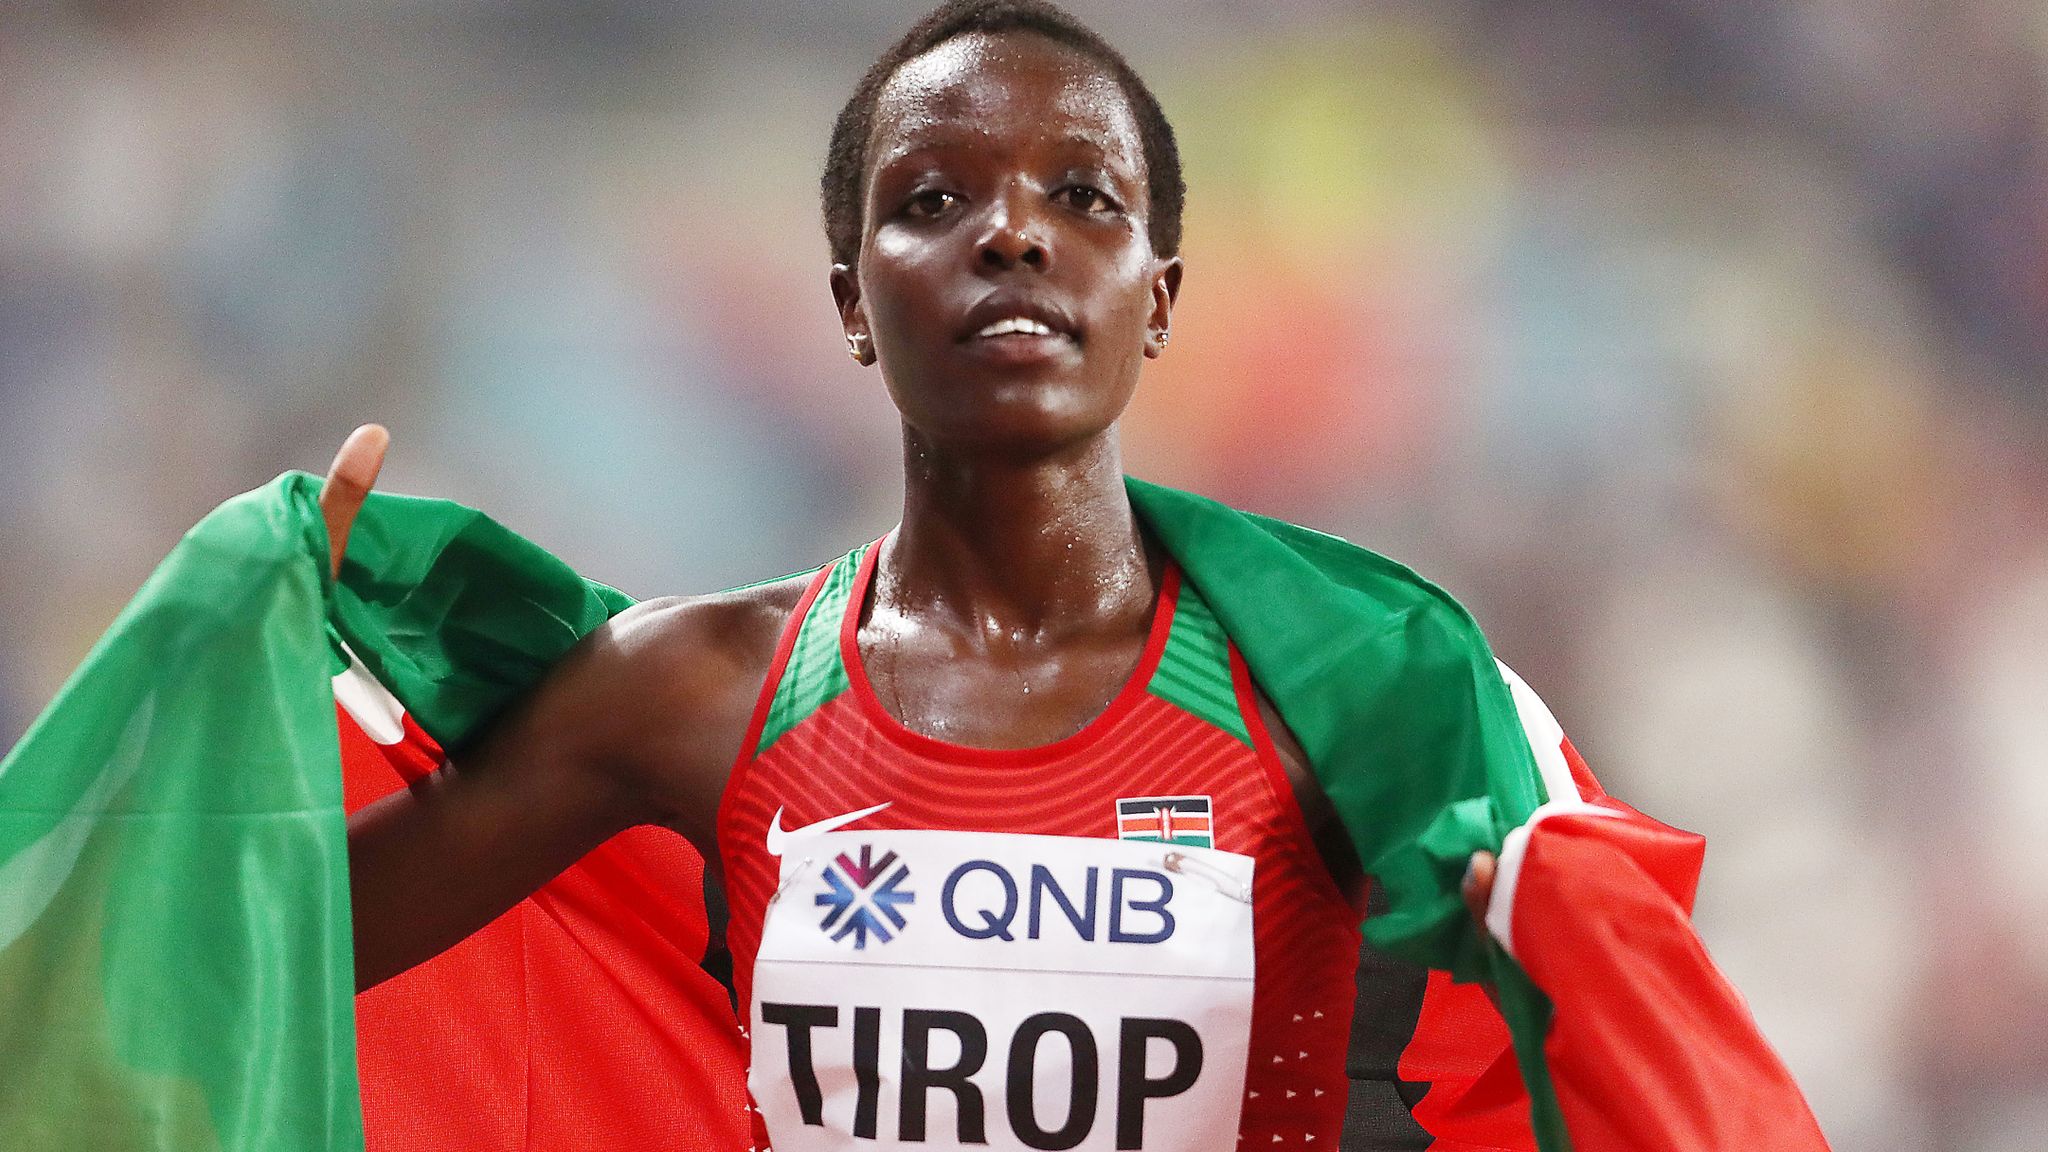 Agnes Tirop, Kenya's Tokyo Olympic star, and World Championship medallist found stabbed to death